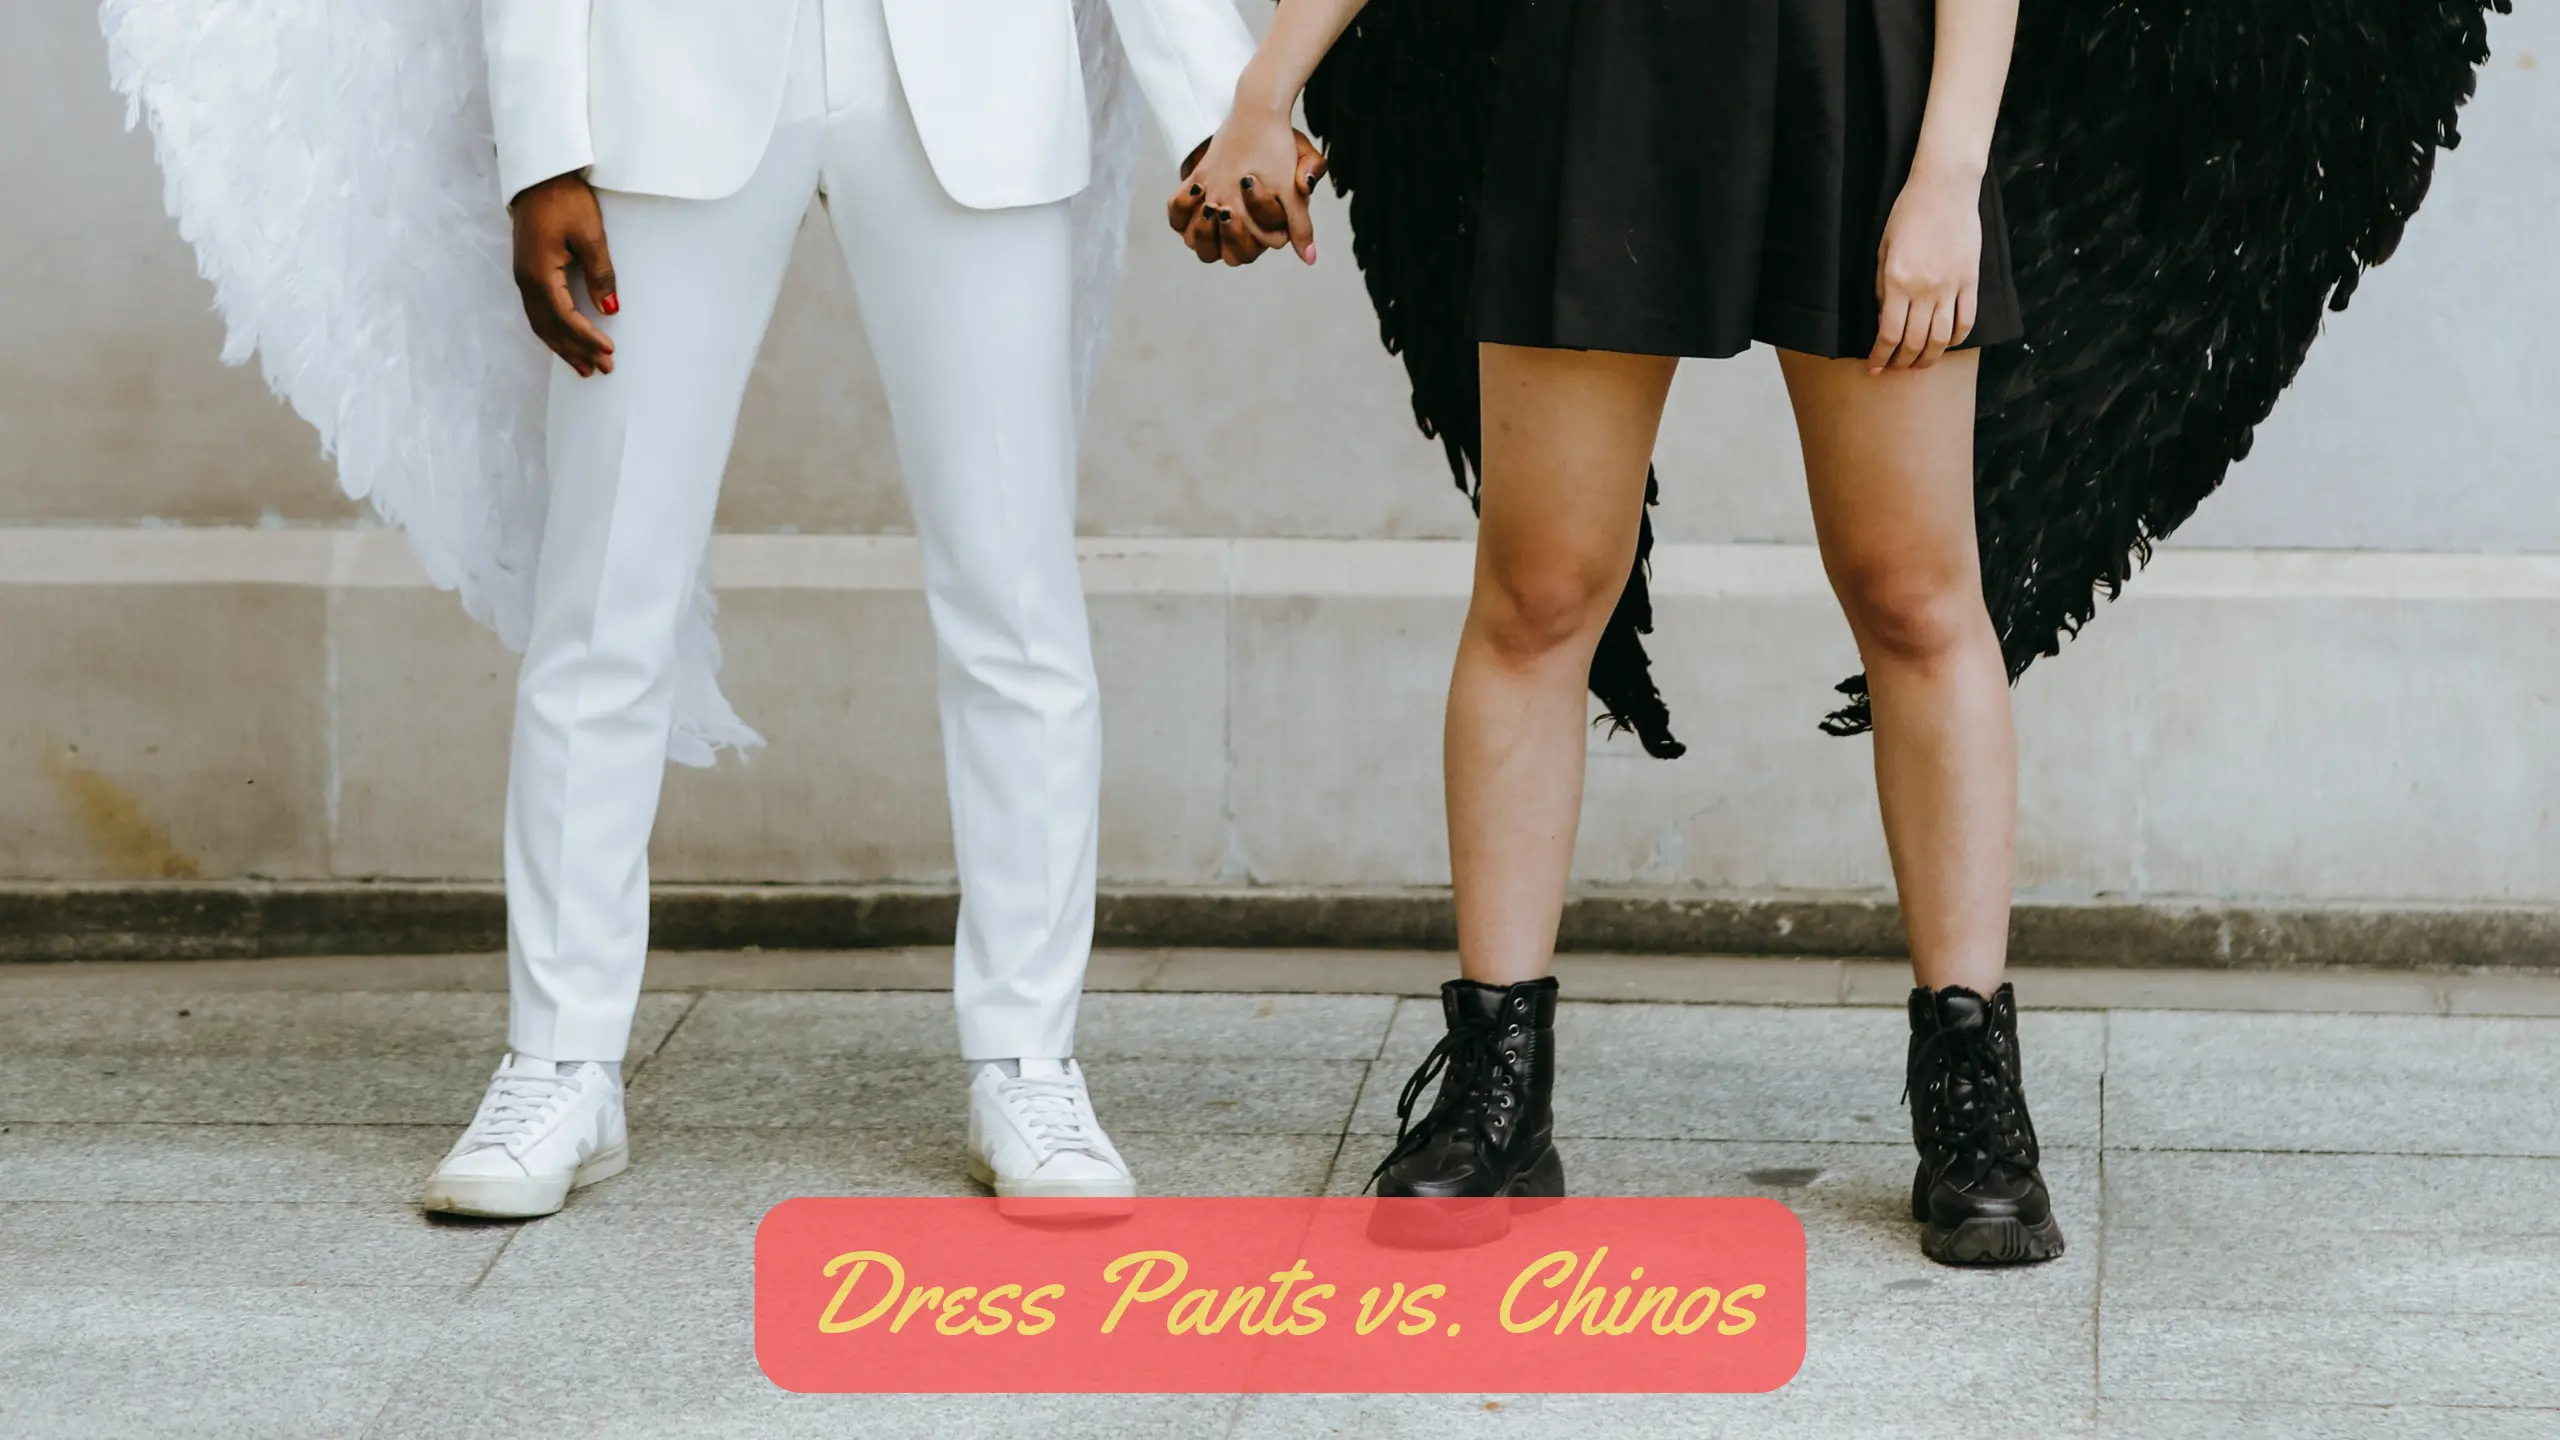 Difference between Dress pants and chinos